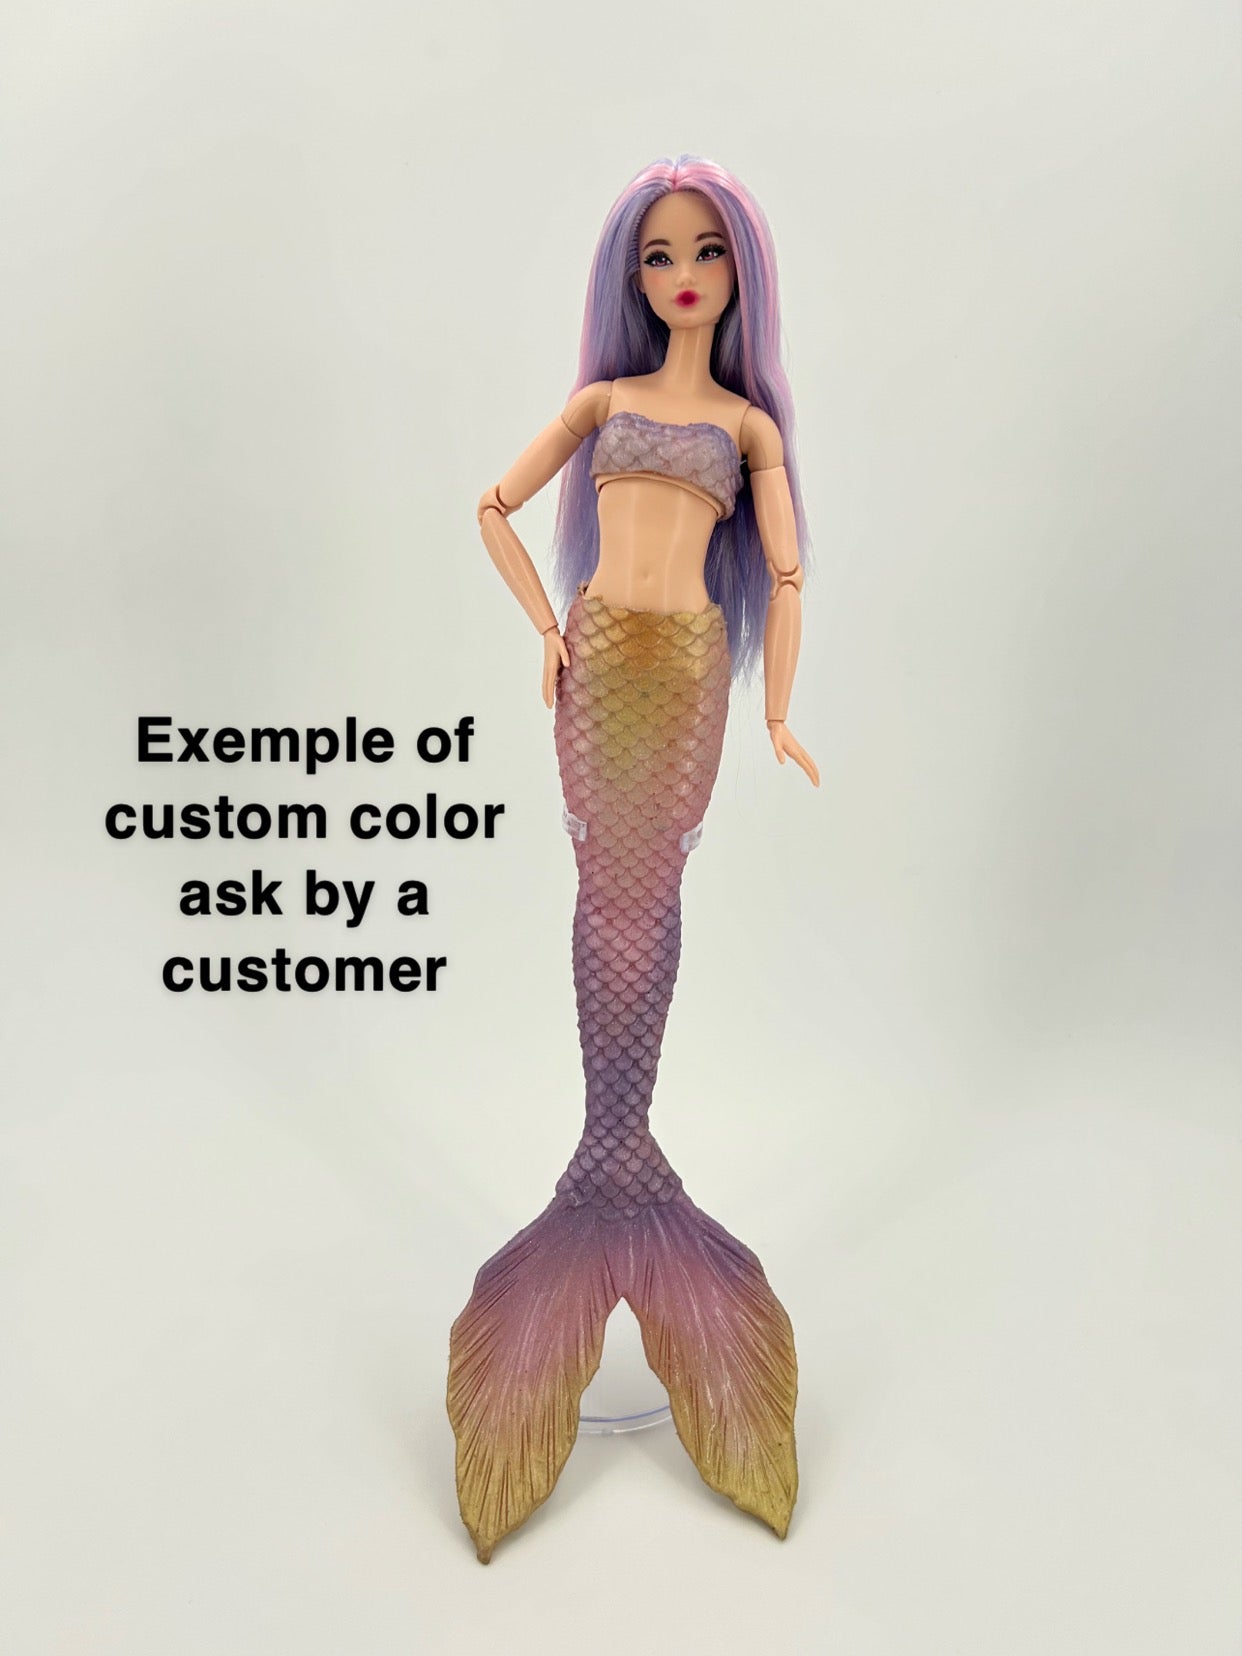 Ariel live action silicone mermaid tail and bra for doll (doll not included)